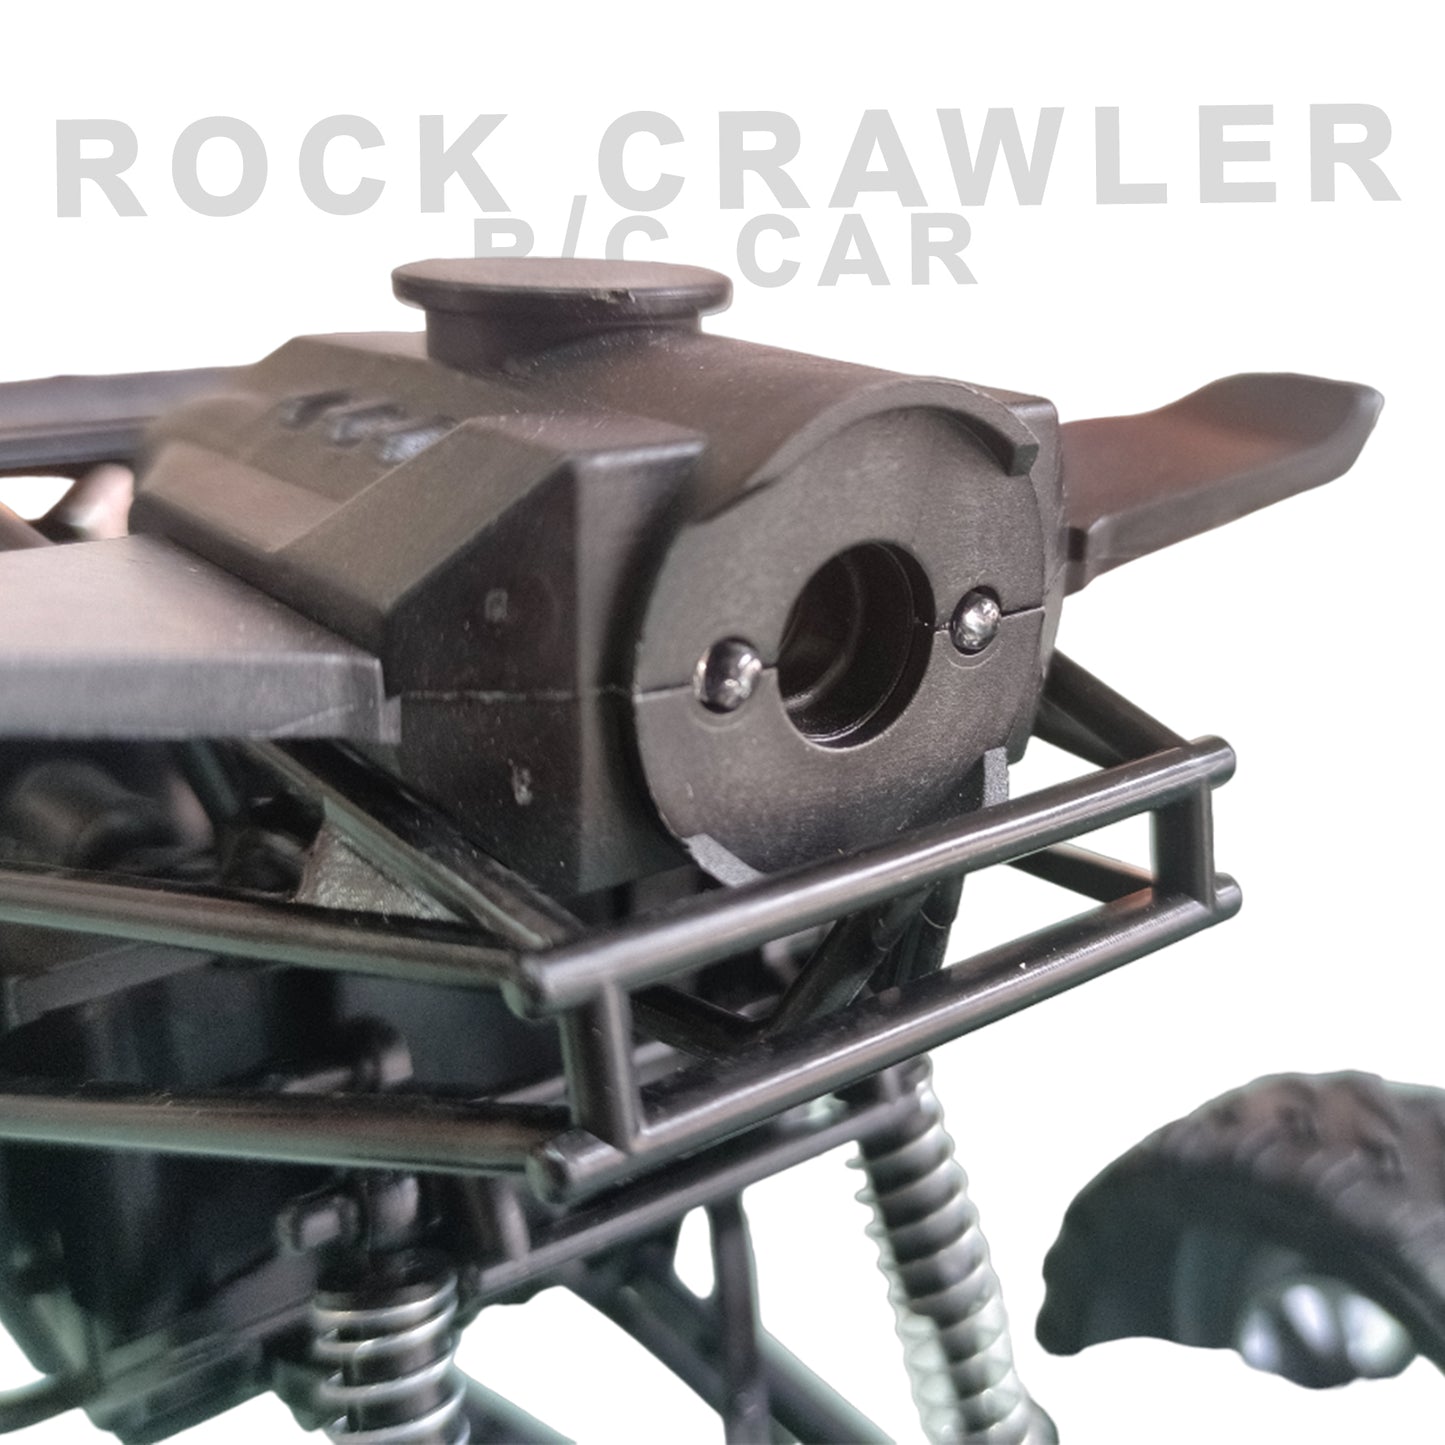 Rock Crawler Scale 4Wd Rally Car The Mean Machine Remote Control Rock Crawler 4X4 High Speed Rechargeable Off-Road Monster Truck|Rock Climbing Car for Boys-Multicolor